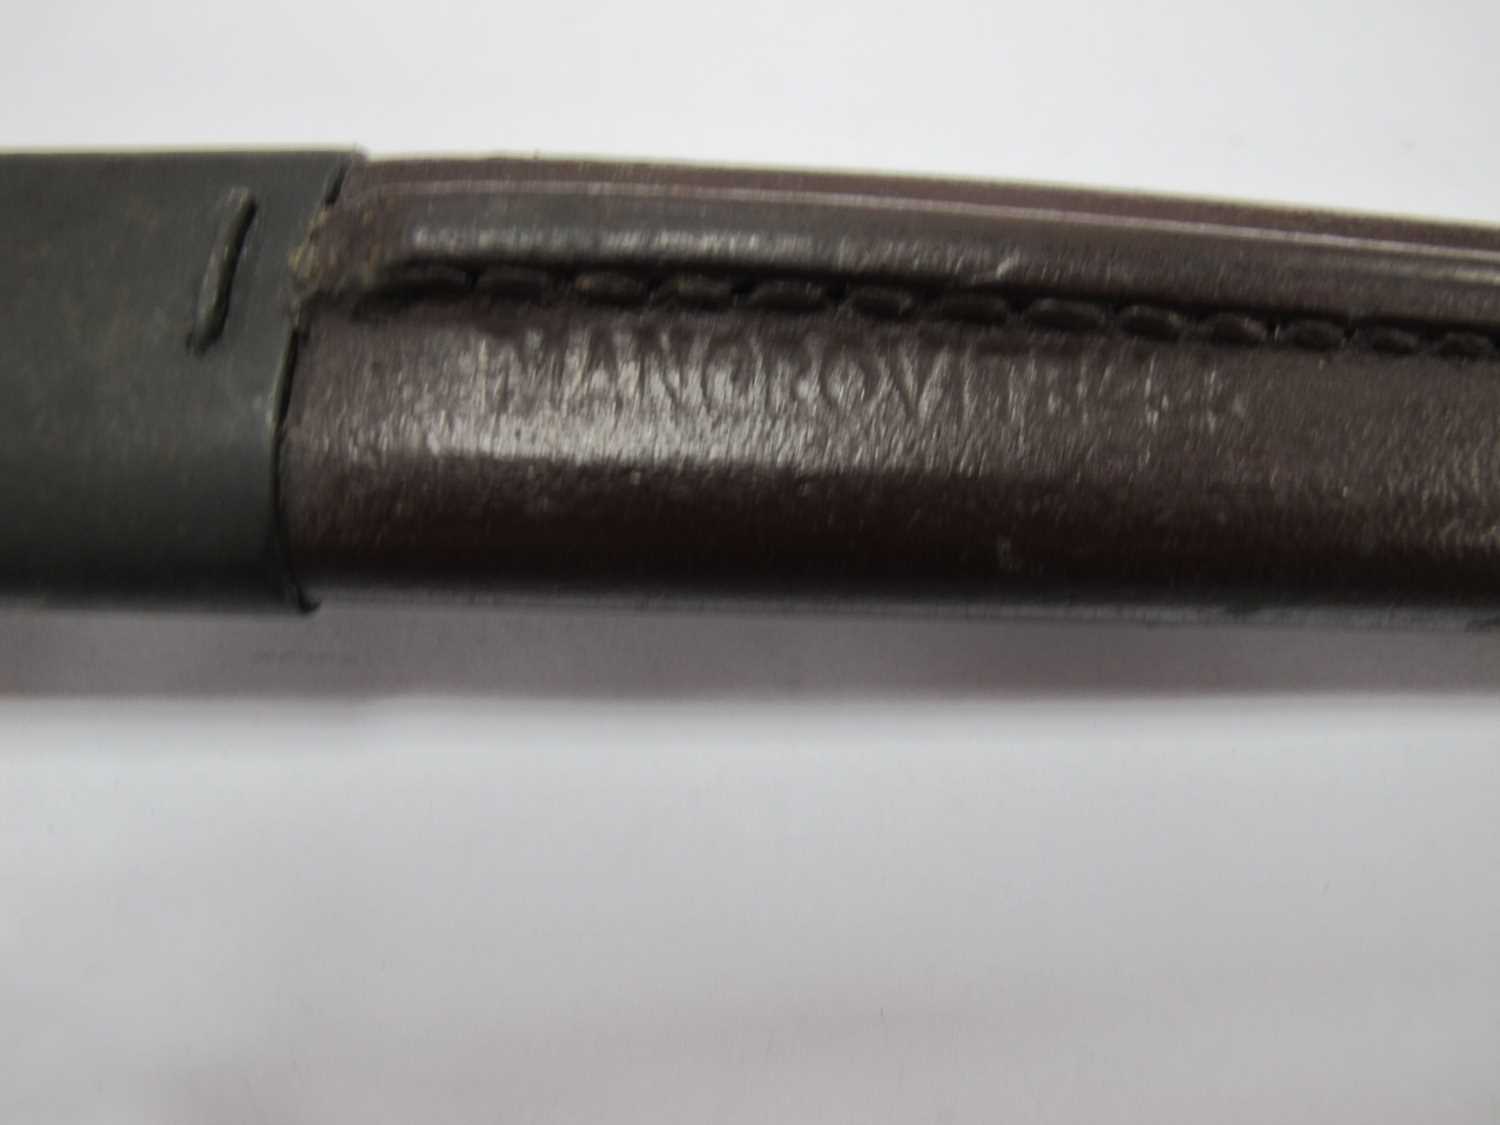 WWII Australian 1907 Pattern Short Bayonet, with various marks on blade including year '45', - Image 8 of 12